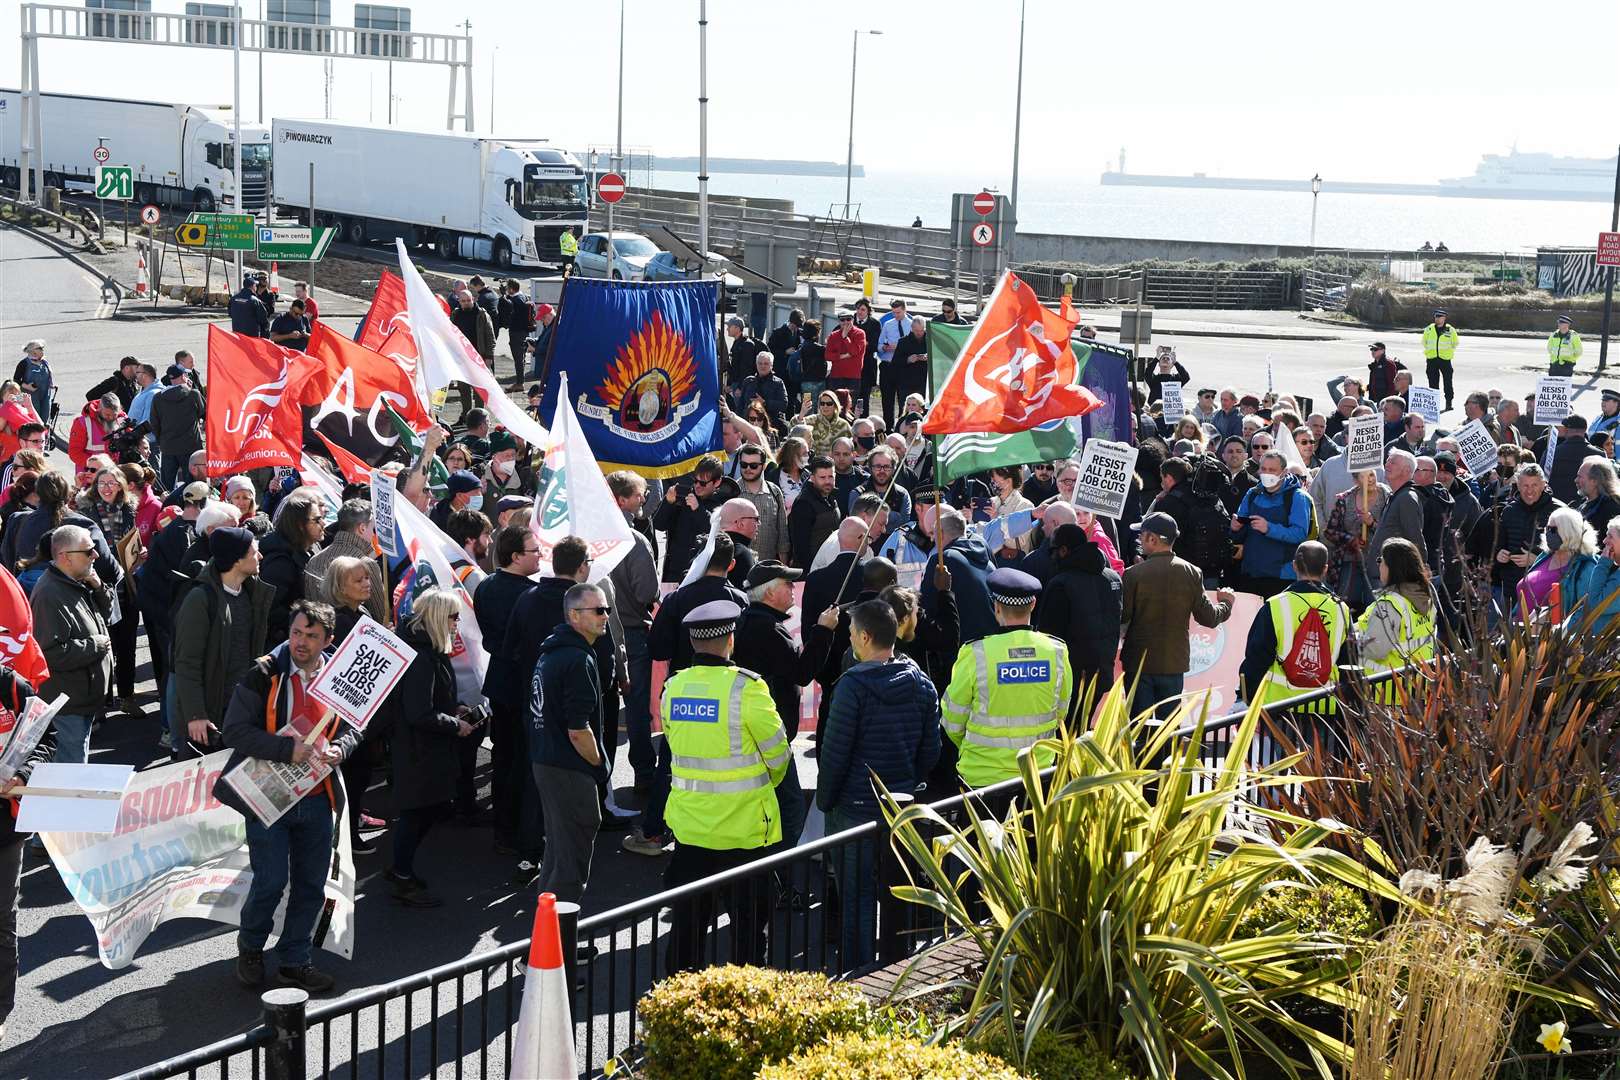 Nearly 800 seafarers were sacked by P&O Ferries in March last year. Picture: Barry Goodwin